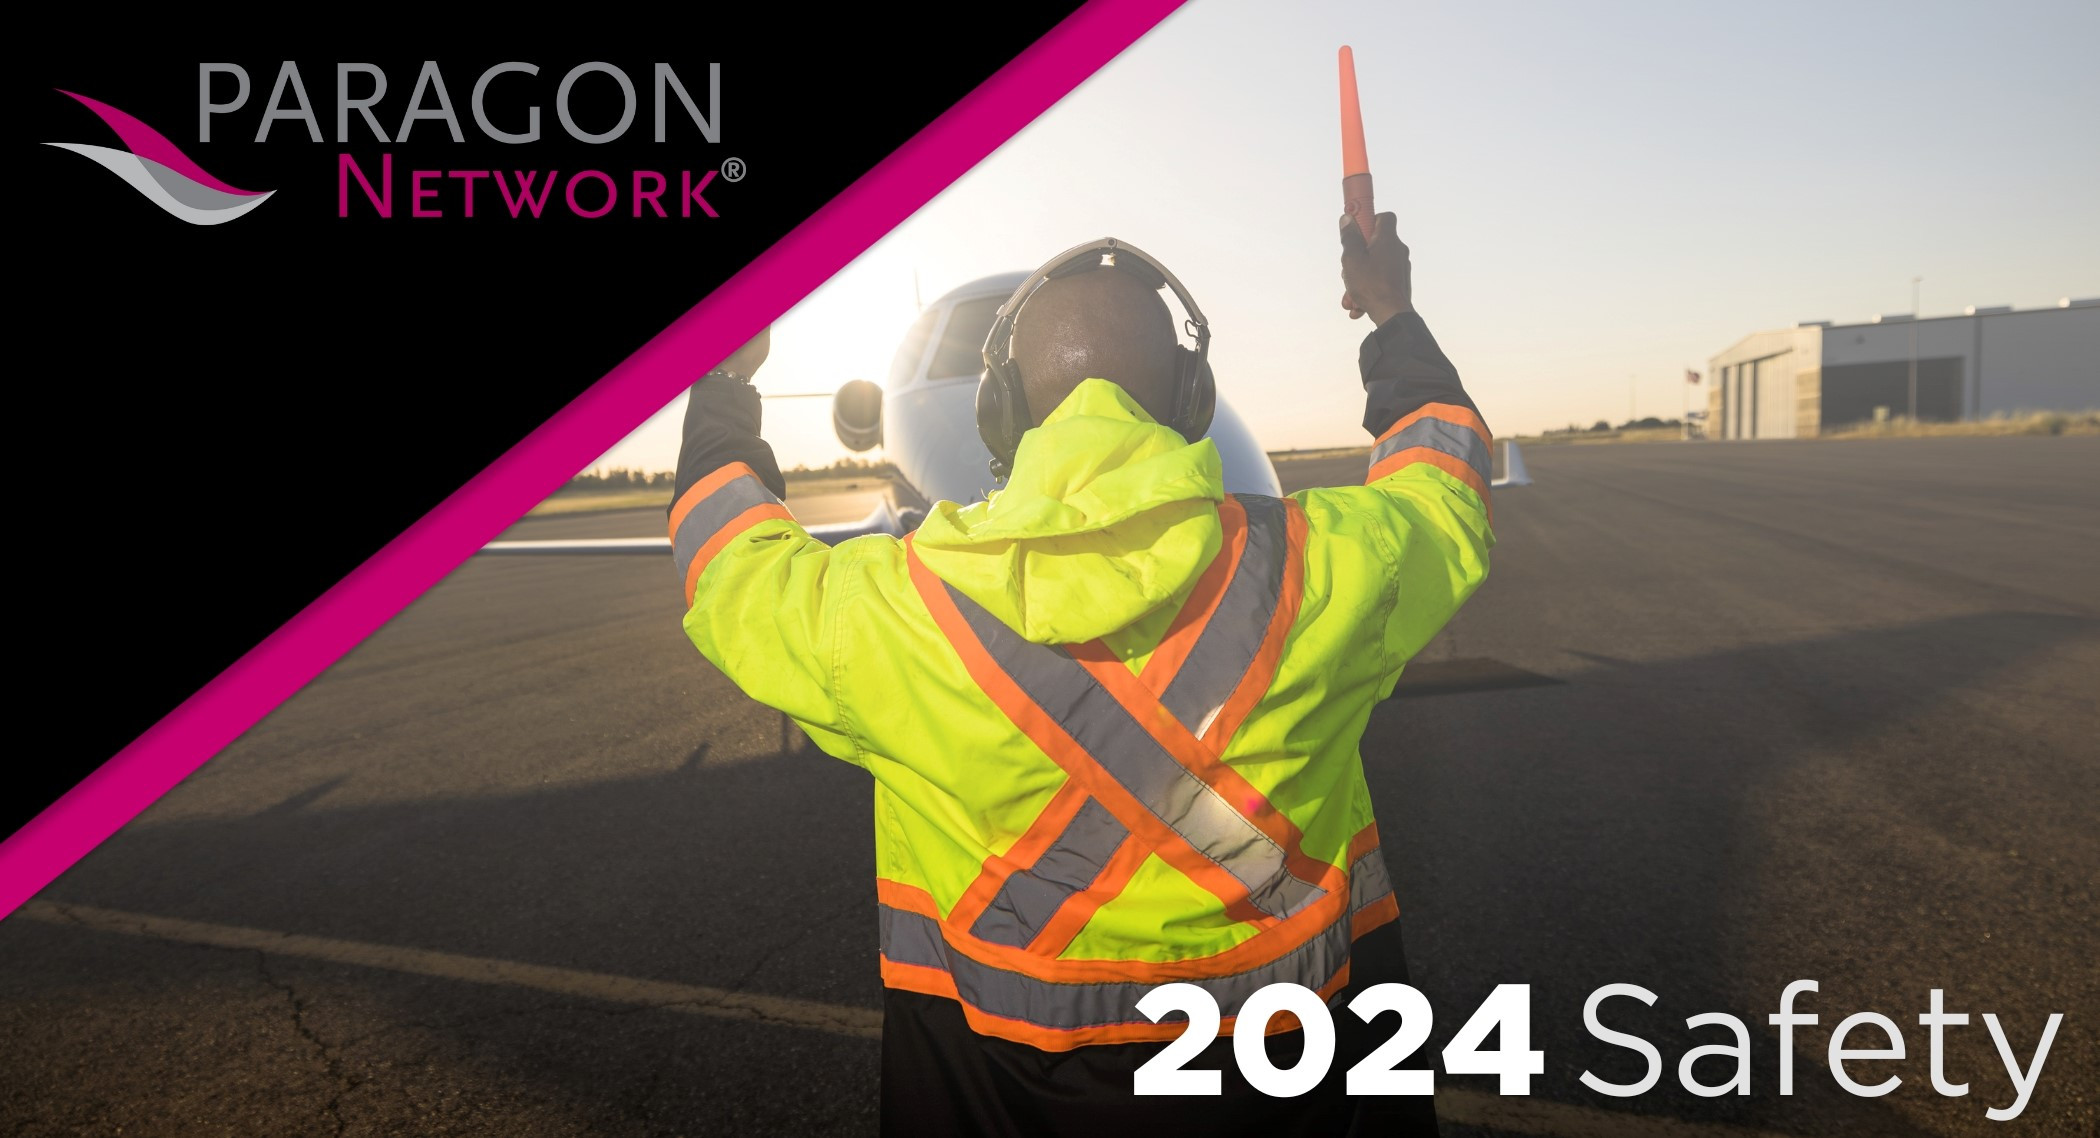 The Paragon Network Elevates FBO Safety Expectations and Training in 2024